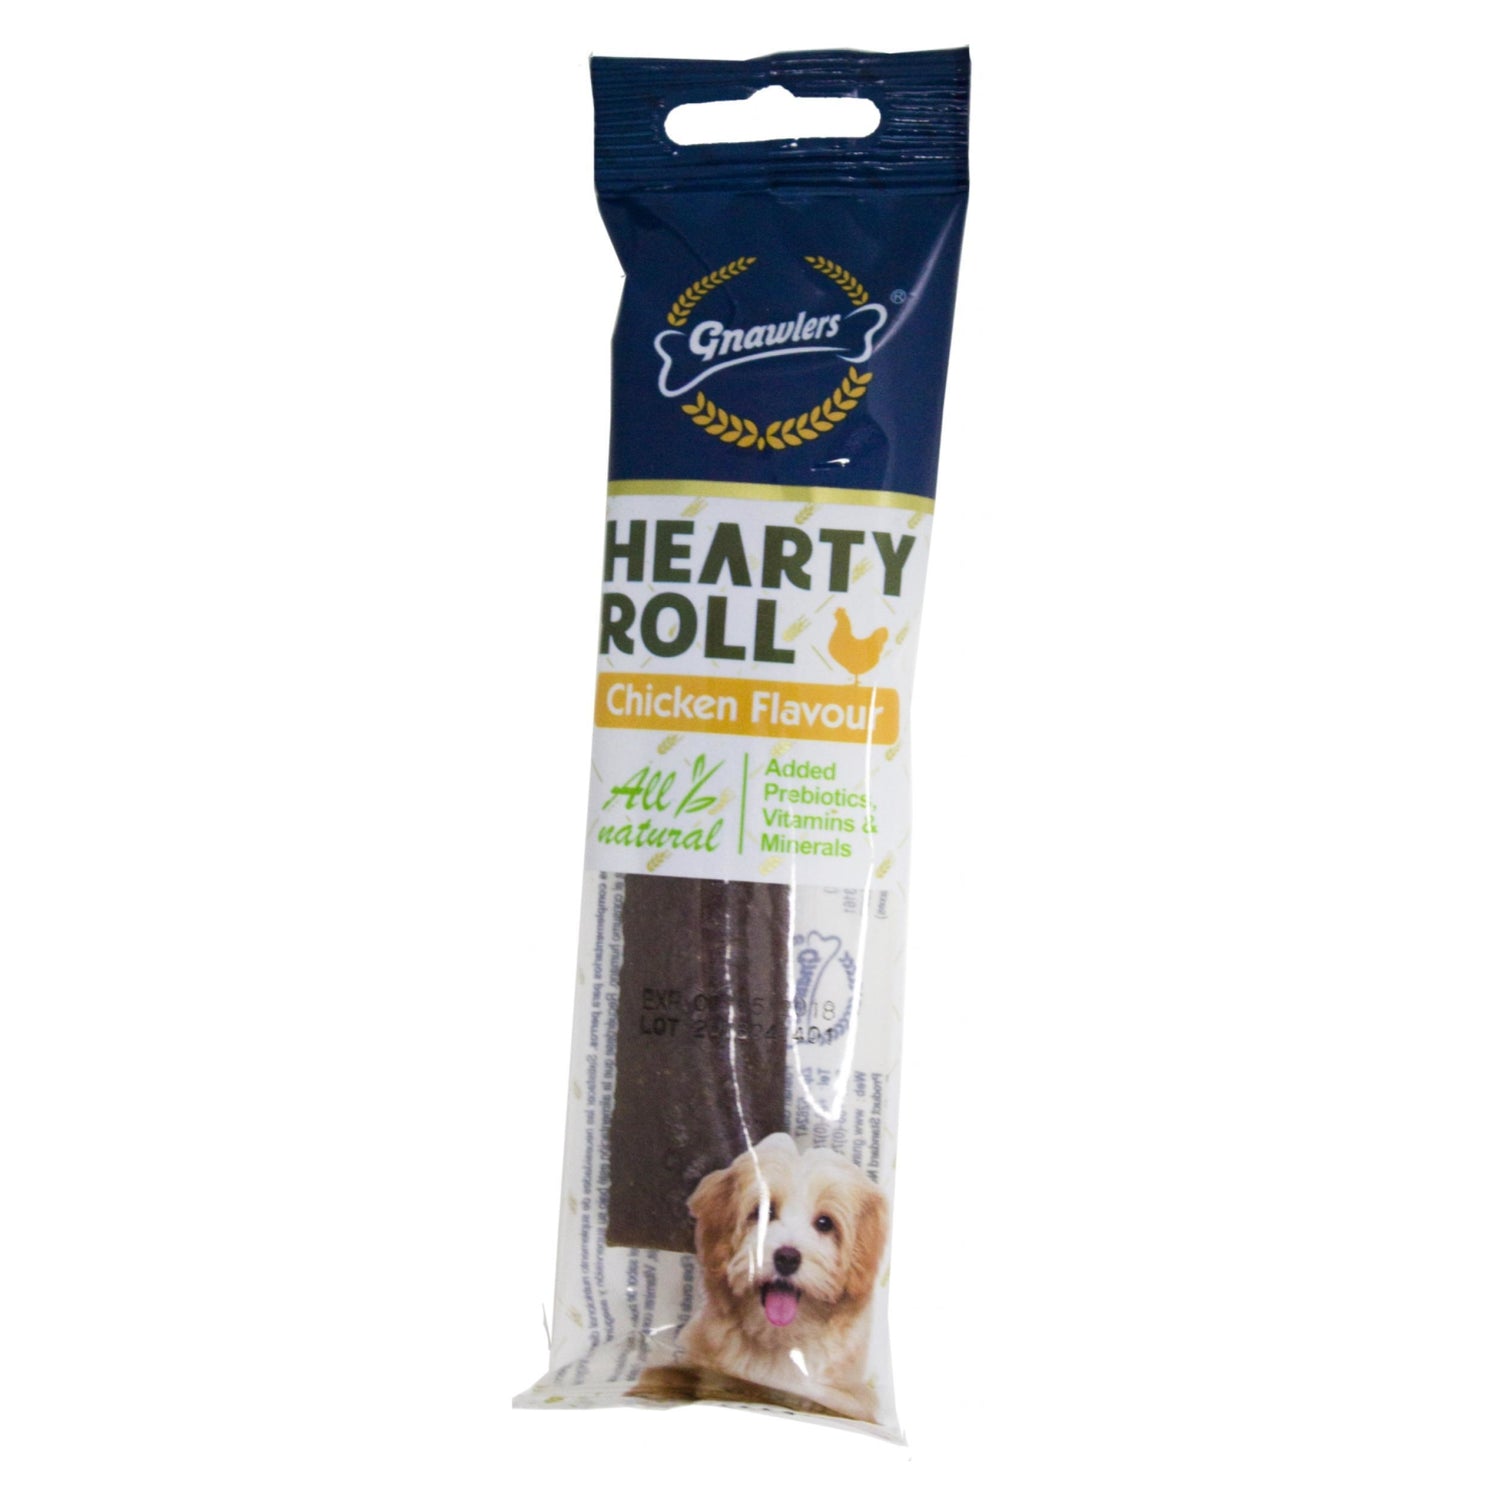 Gnawlers Hearty Roll Chicken Puppy And Dog Chew Treat x 3 nos